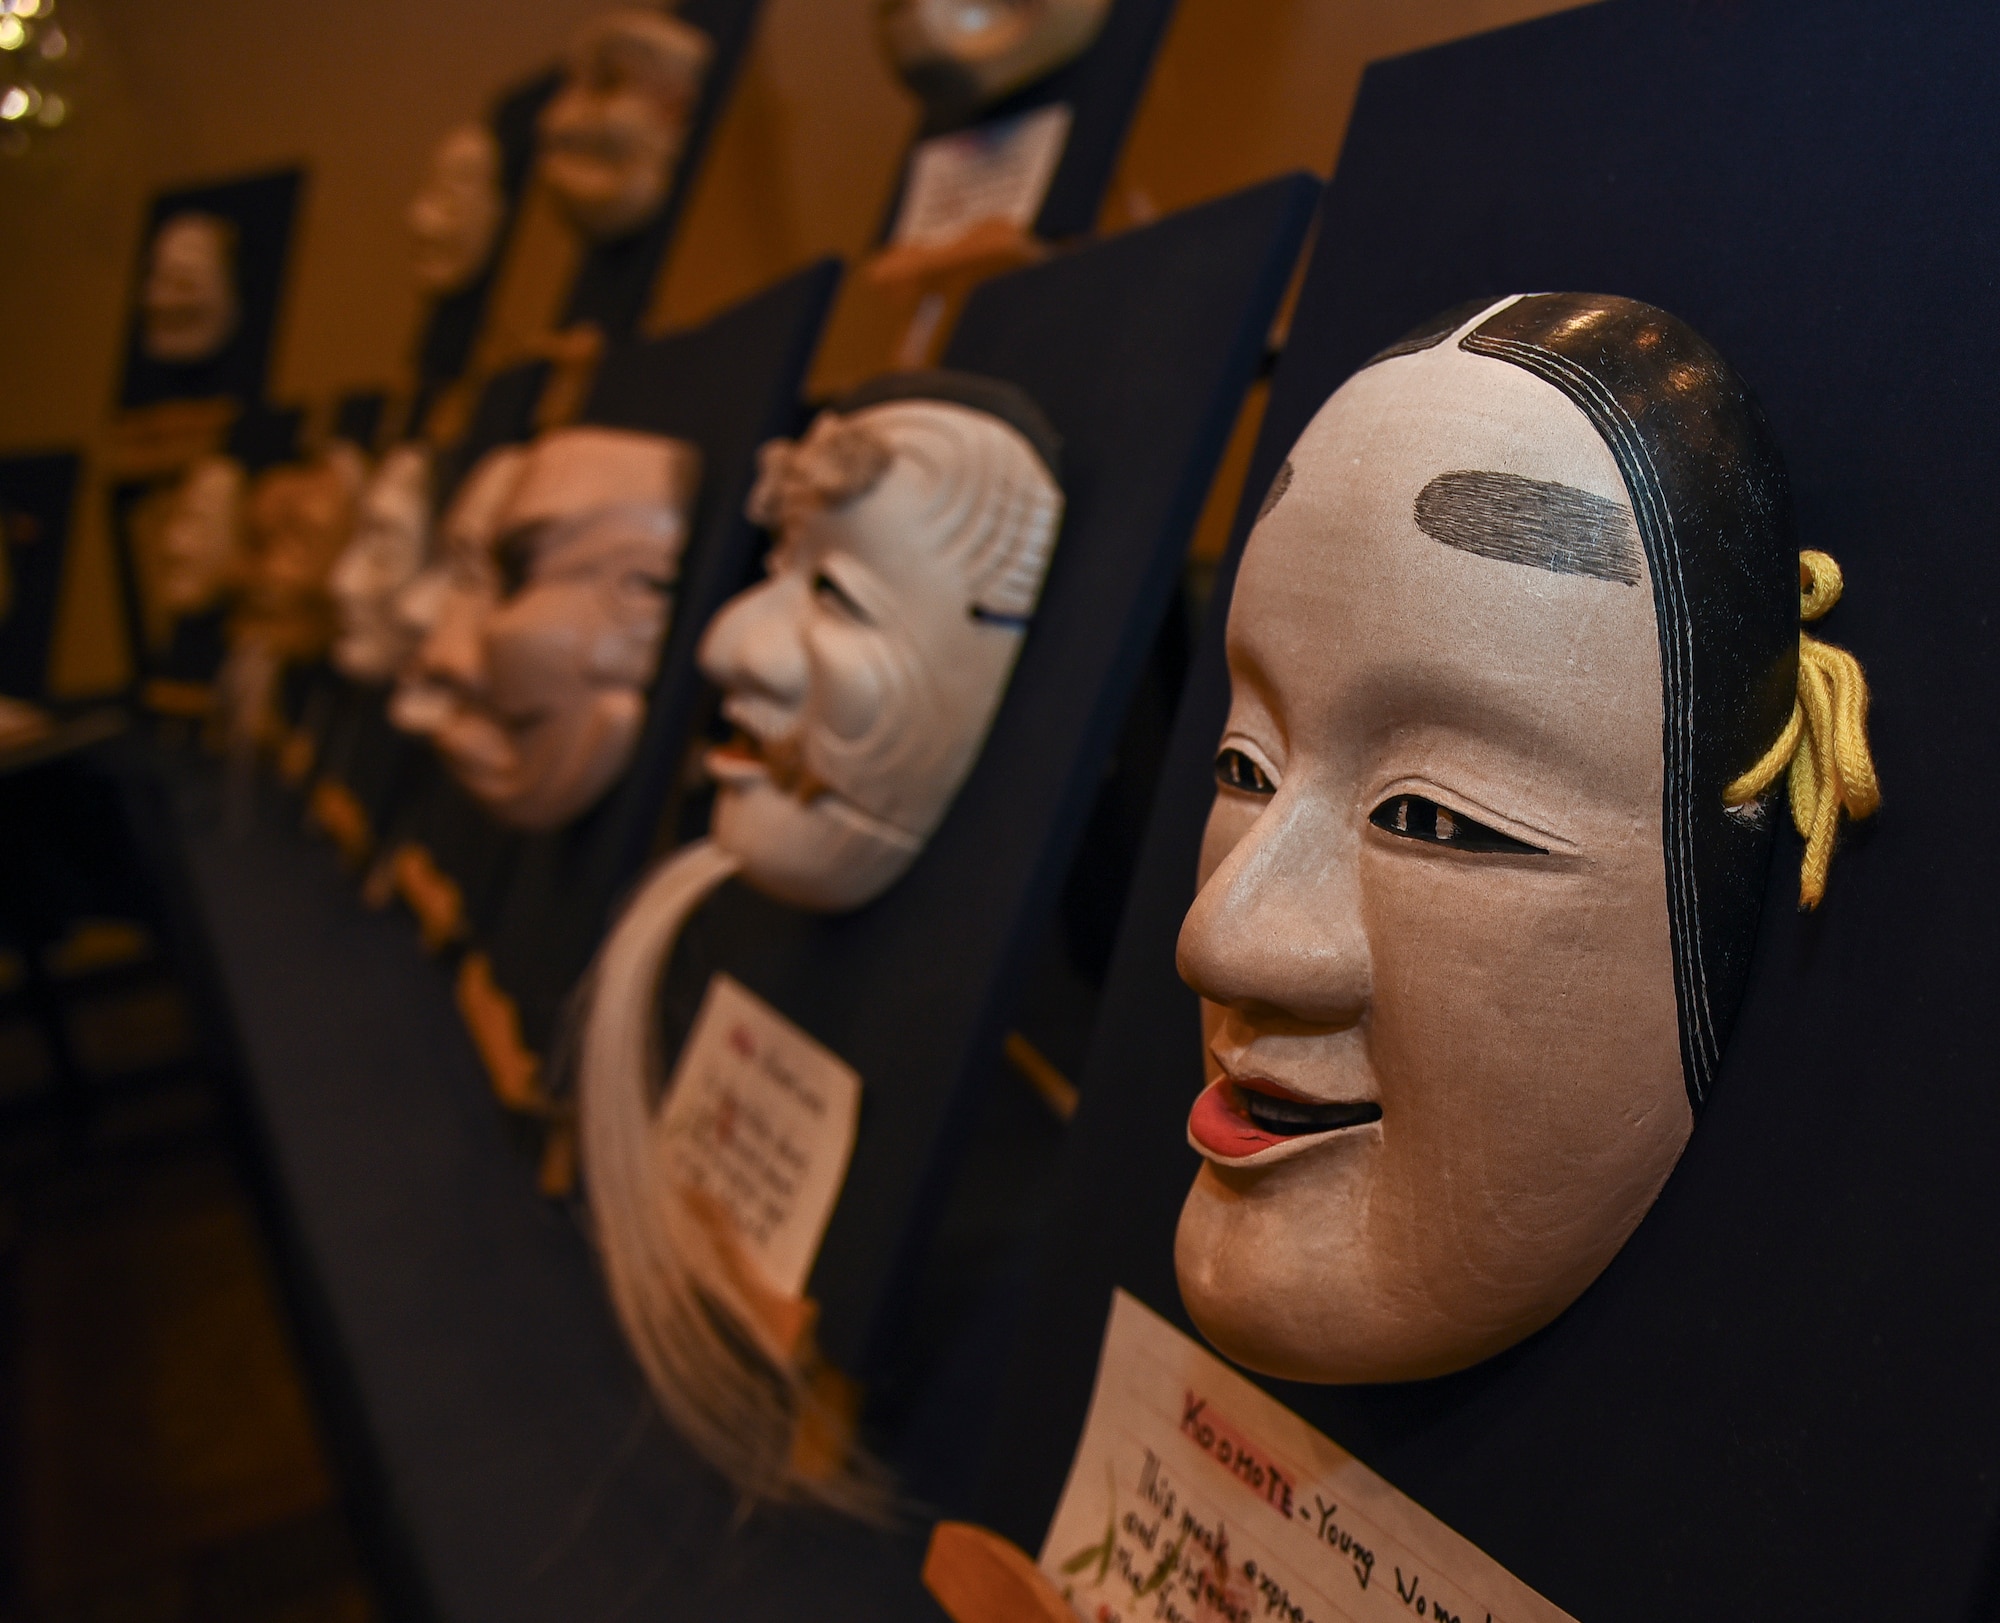 A collection of Noh masks line the entrance to the 32nd Annual Japan Day at Misawa Air Base, Japan, April 6, 2019. Noh masks were traditionally used in Japanese theatre for hundreds of years and have numerous types with different meanings in Japanese culture. (U.S. Air Force photo by Branden Yamada)